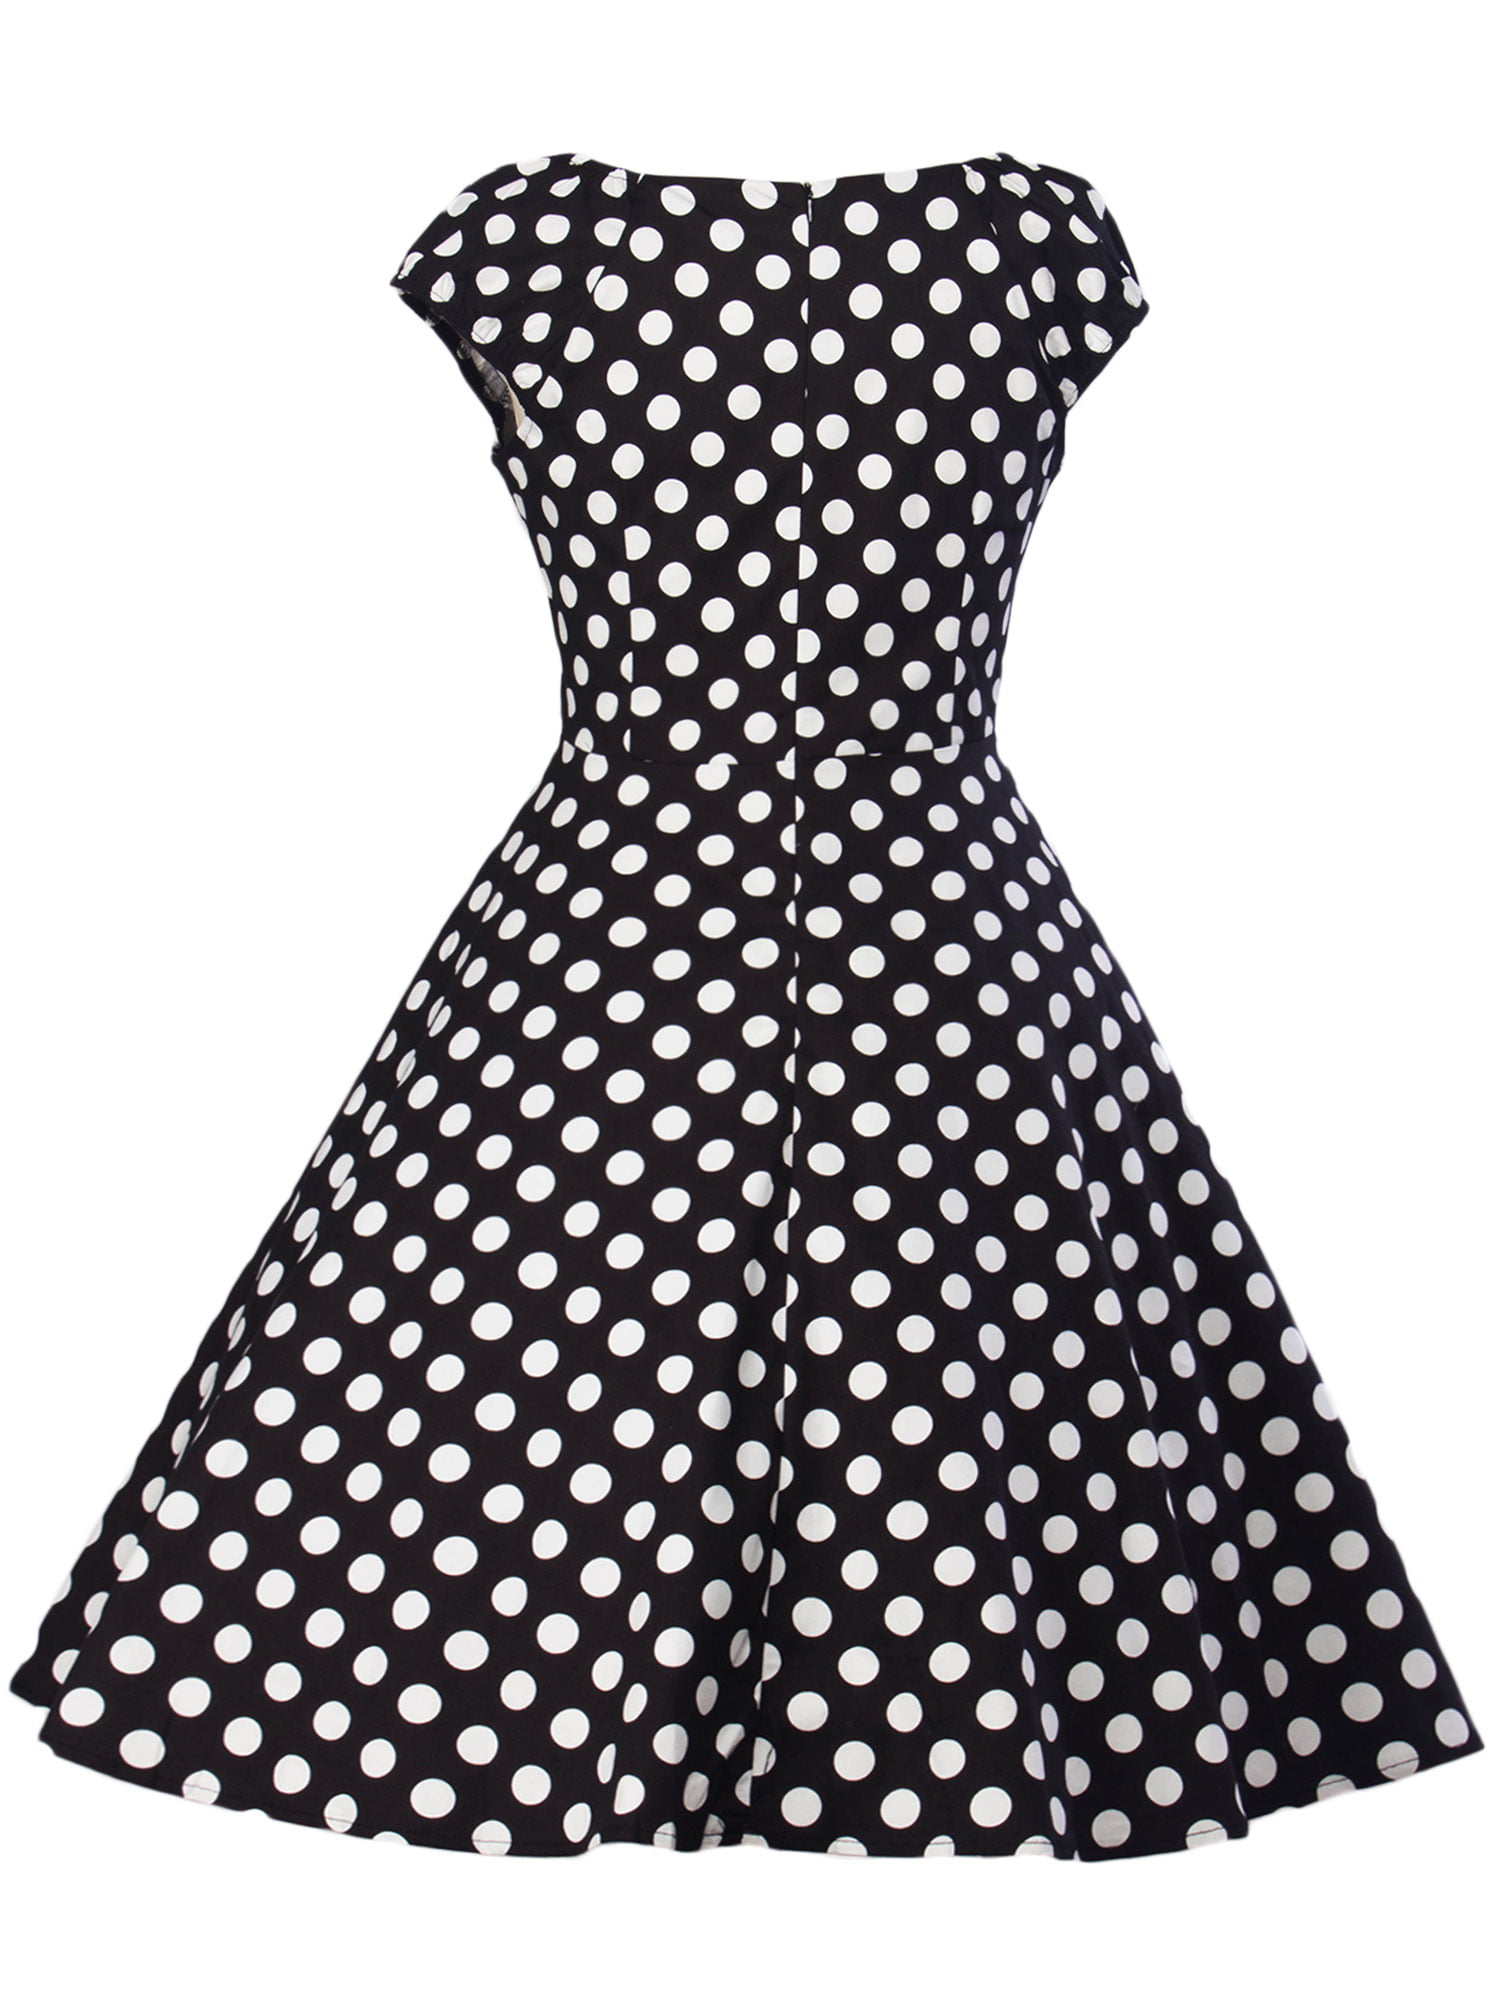 Kids Vintage 50's Girls Dress Audrey Style Polka Dot Retro Floral Print Rockabilly A Line Swing Party Dresses for Wedding Brithday Christmas Cocktail Evening Prom